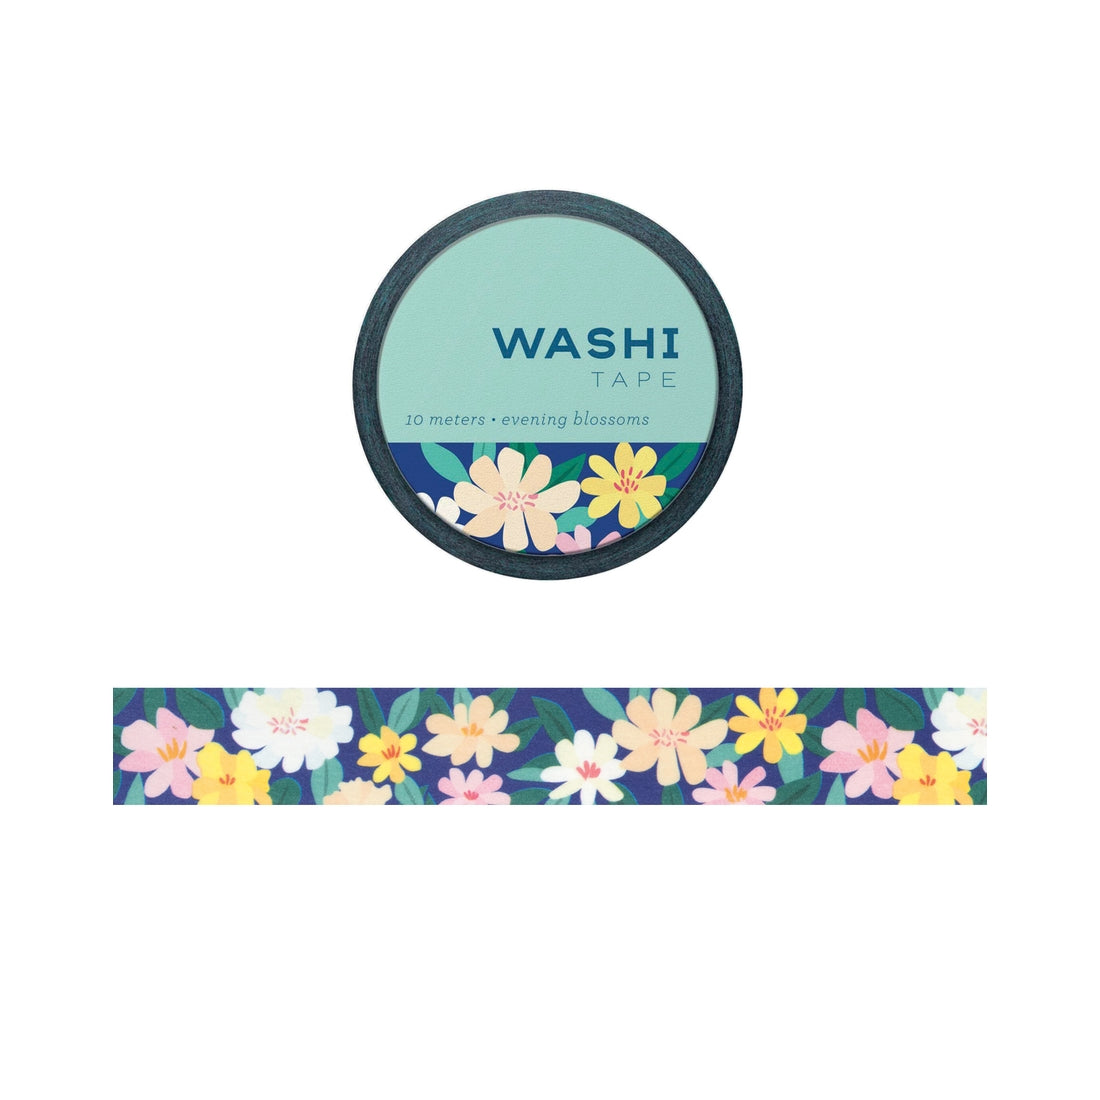 Washi Tape Evening Blossoms Washi Tape - Paws Enrich Plan - Dog, Puppy, Nature & Adventure Inspired Stationery